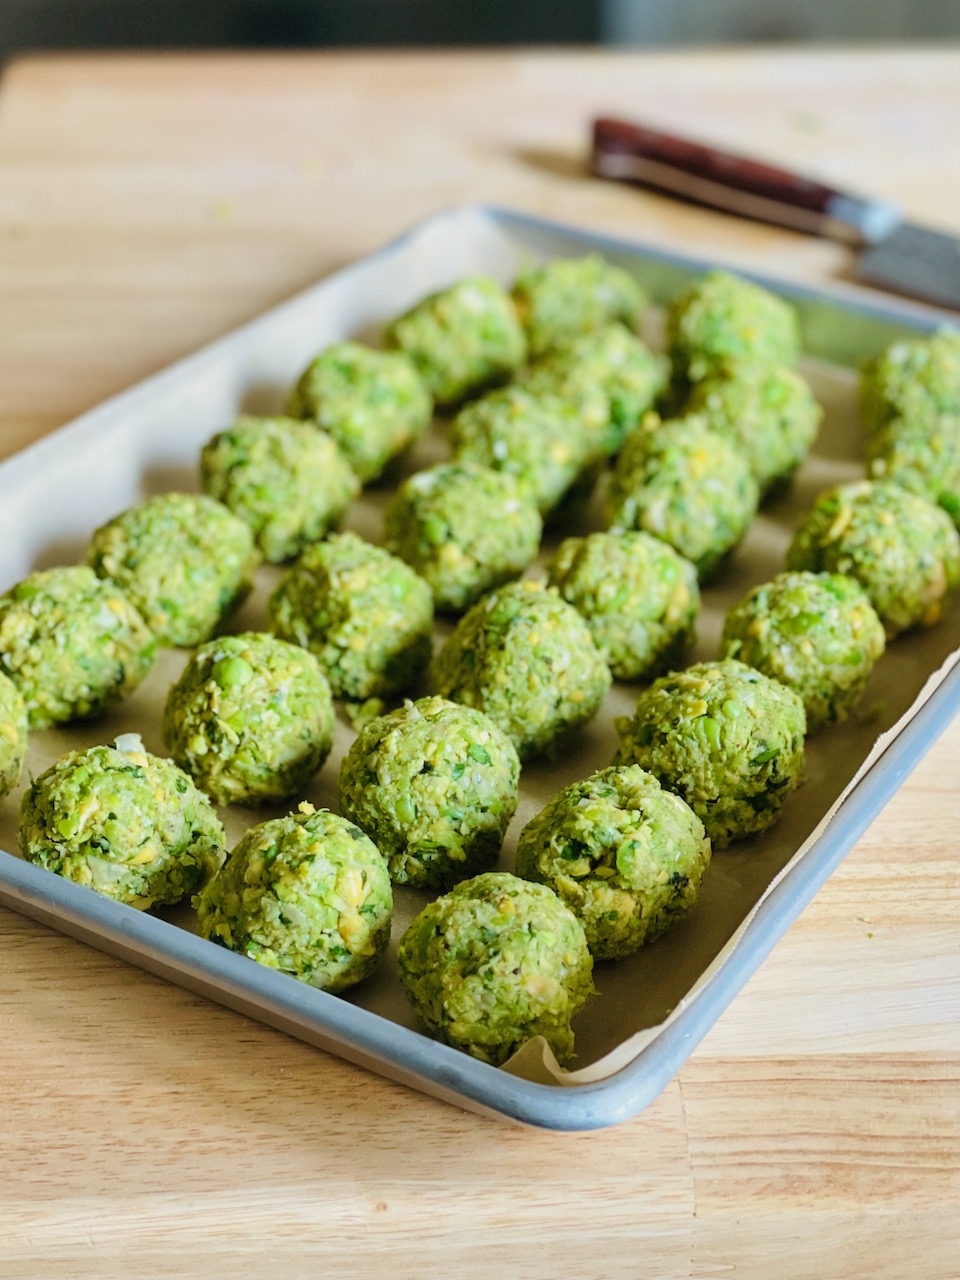 Photo of a tray of prepared falafel balls before frying.